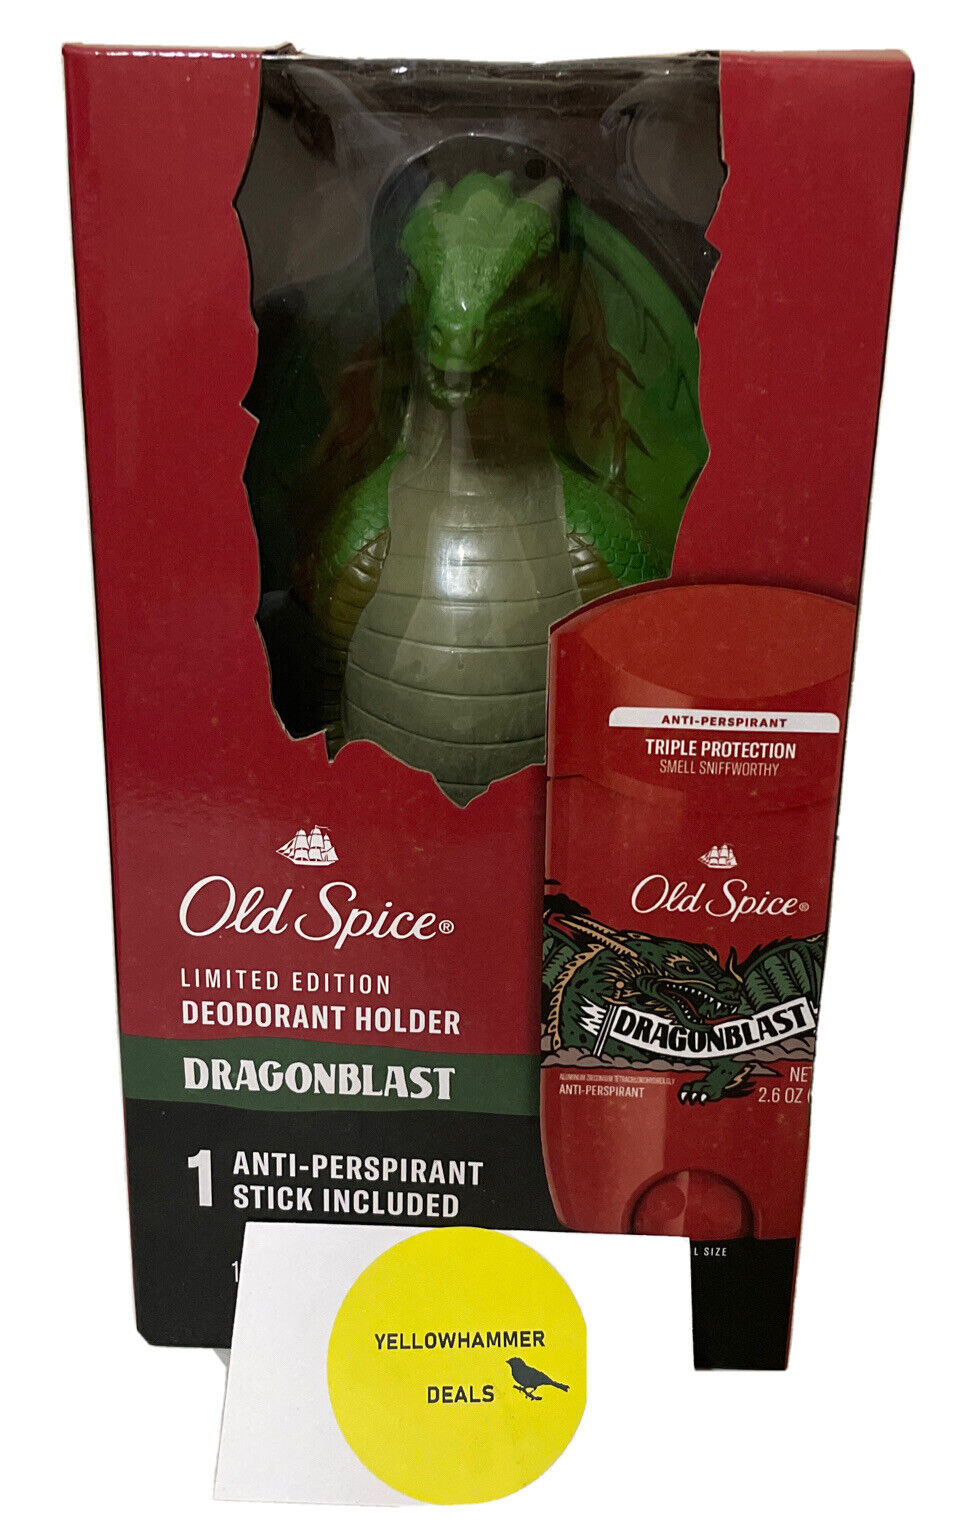 Old Spice Limited Edition Deodorant Holder Dragonblast Anti-Perspirant Included